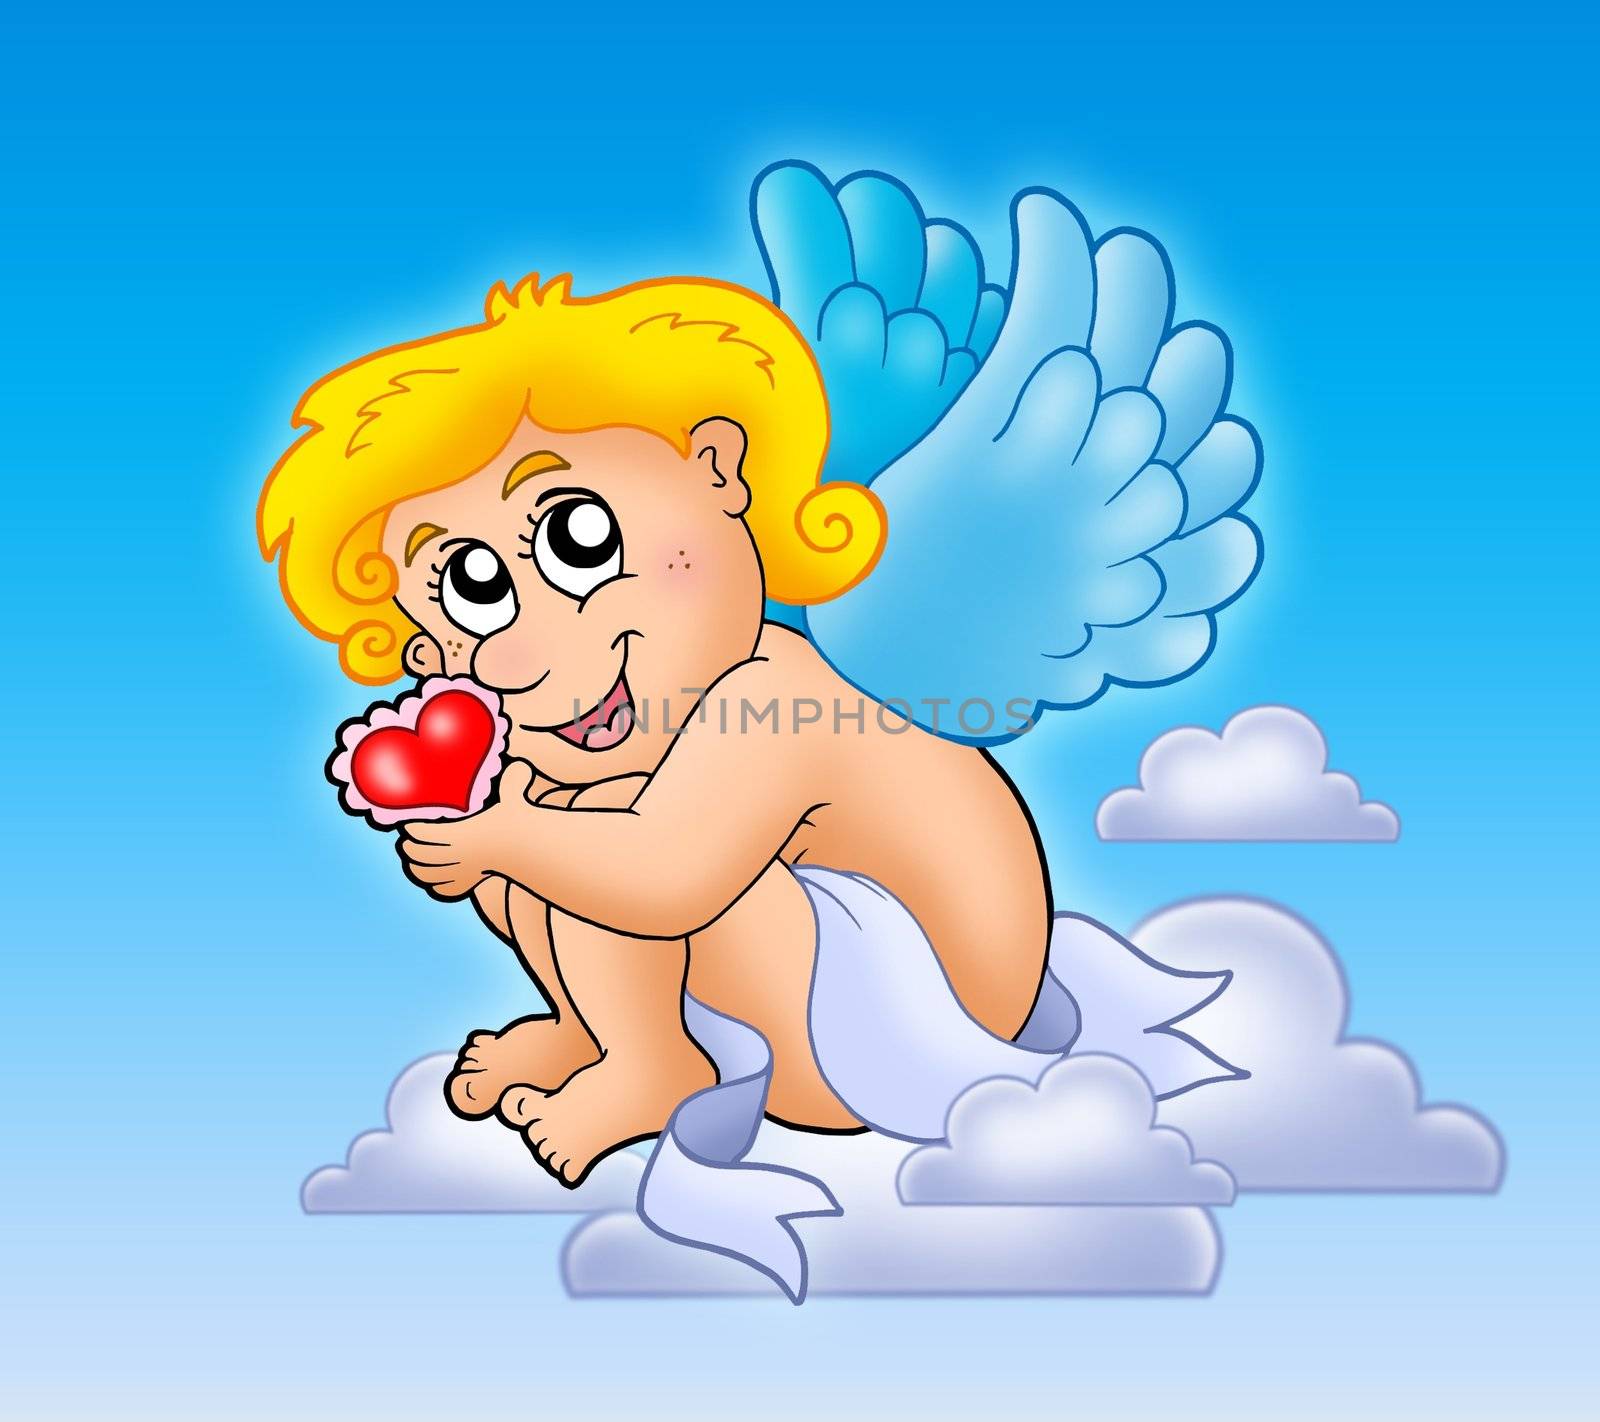 Cupid with heart on blue sky - color illustration.